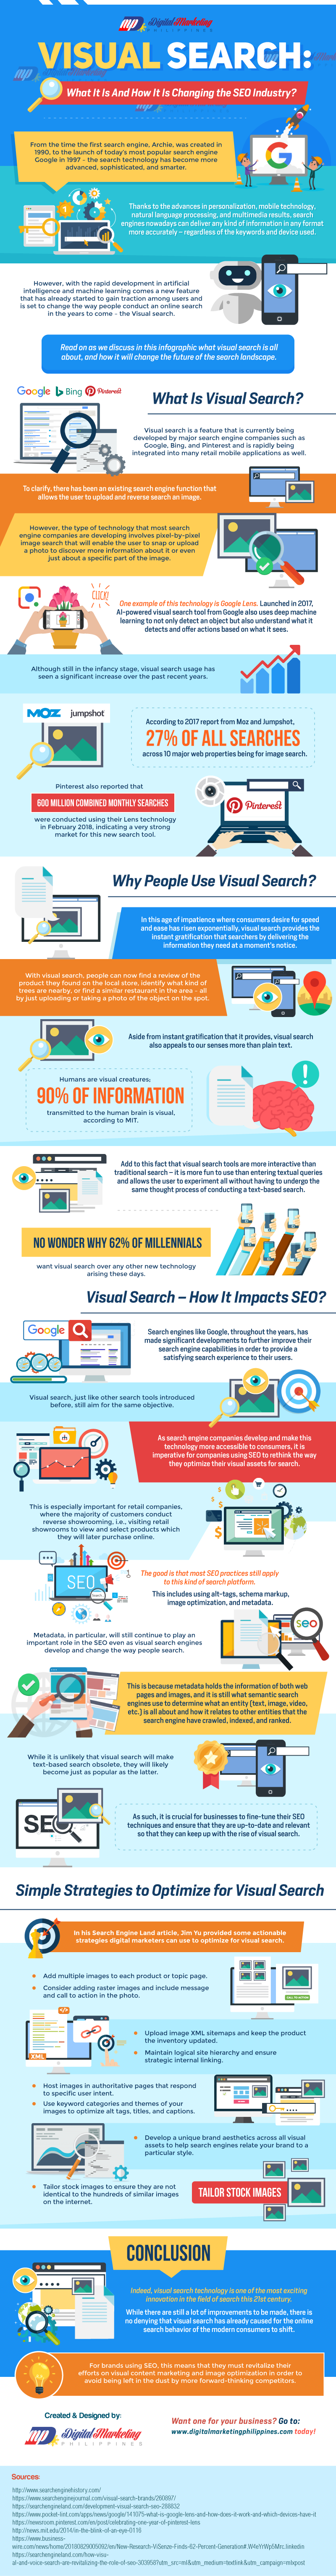 Visual Search: What It Is And How It Is Changing the SEO Industry?